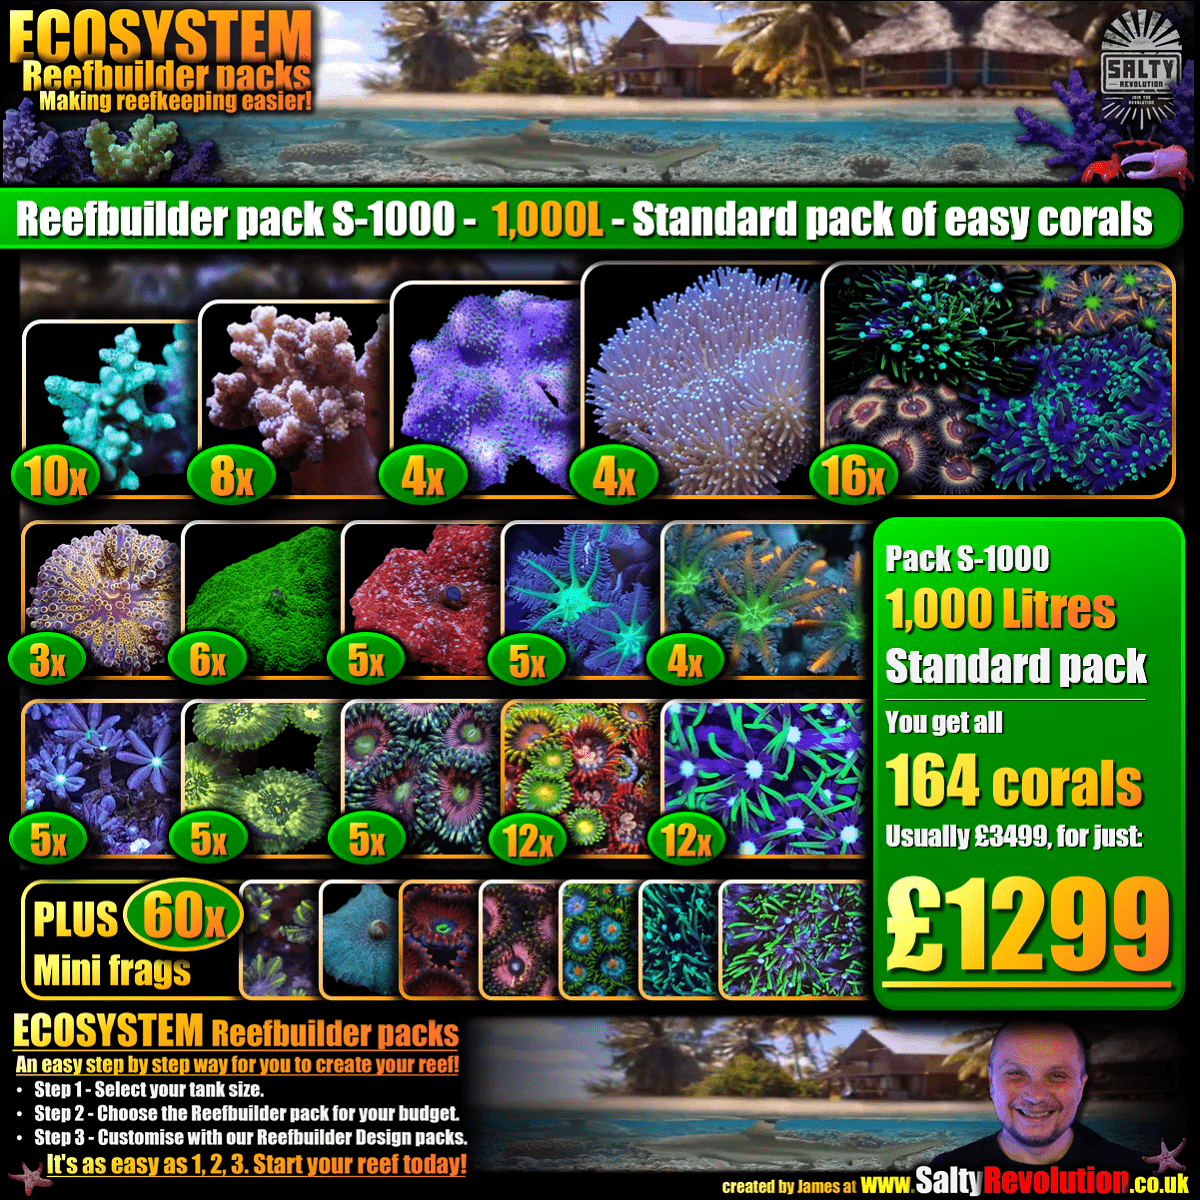 New! - ECOSYSTEM Reefbuilder pack S-1000 - 1,000L Standard pack of easy corals